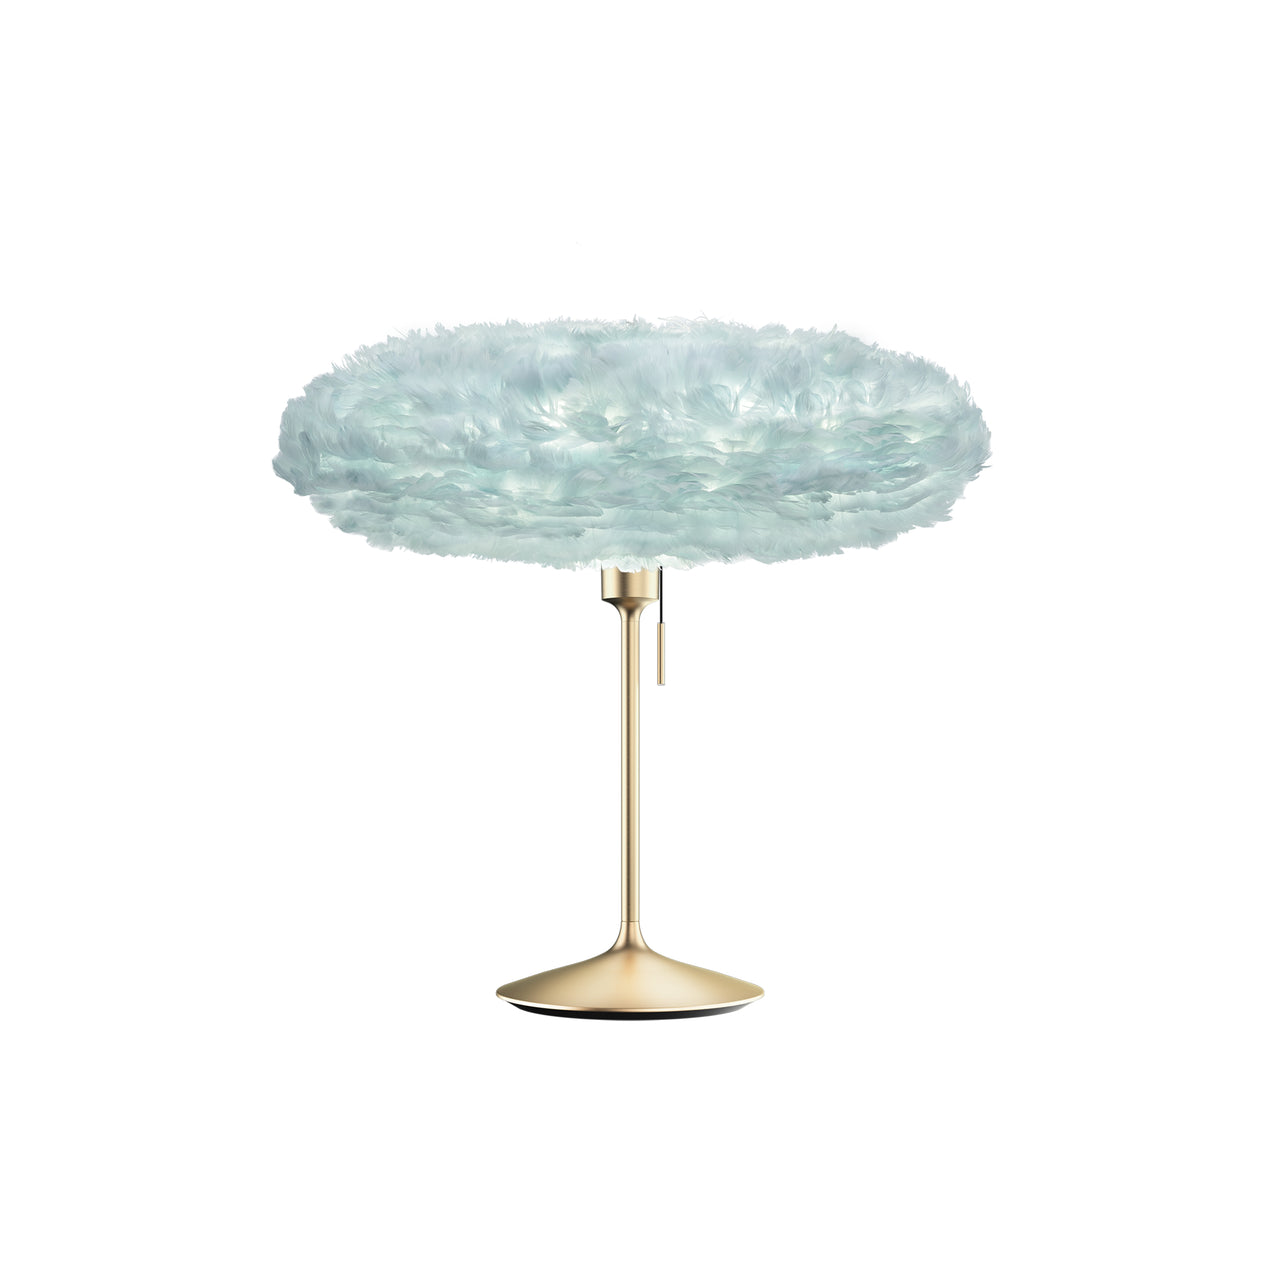 Eos Esther Champagne Table Lamp: Medium - 24